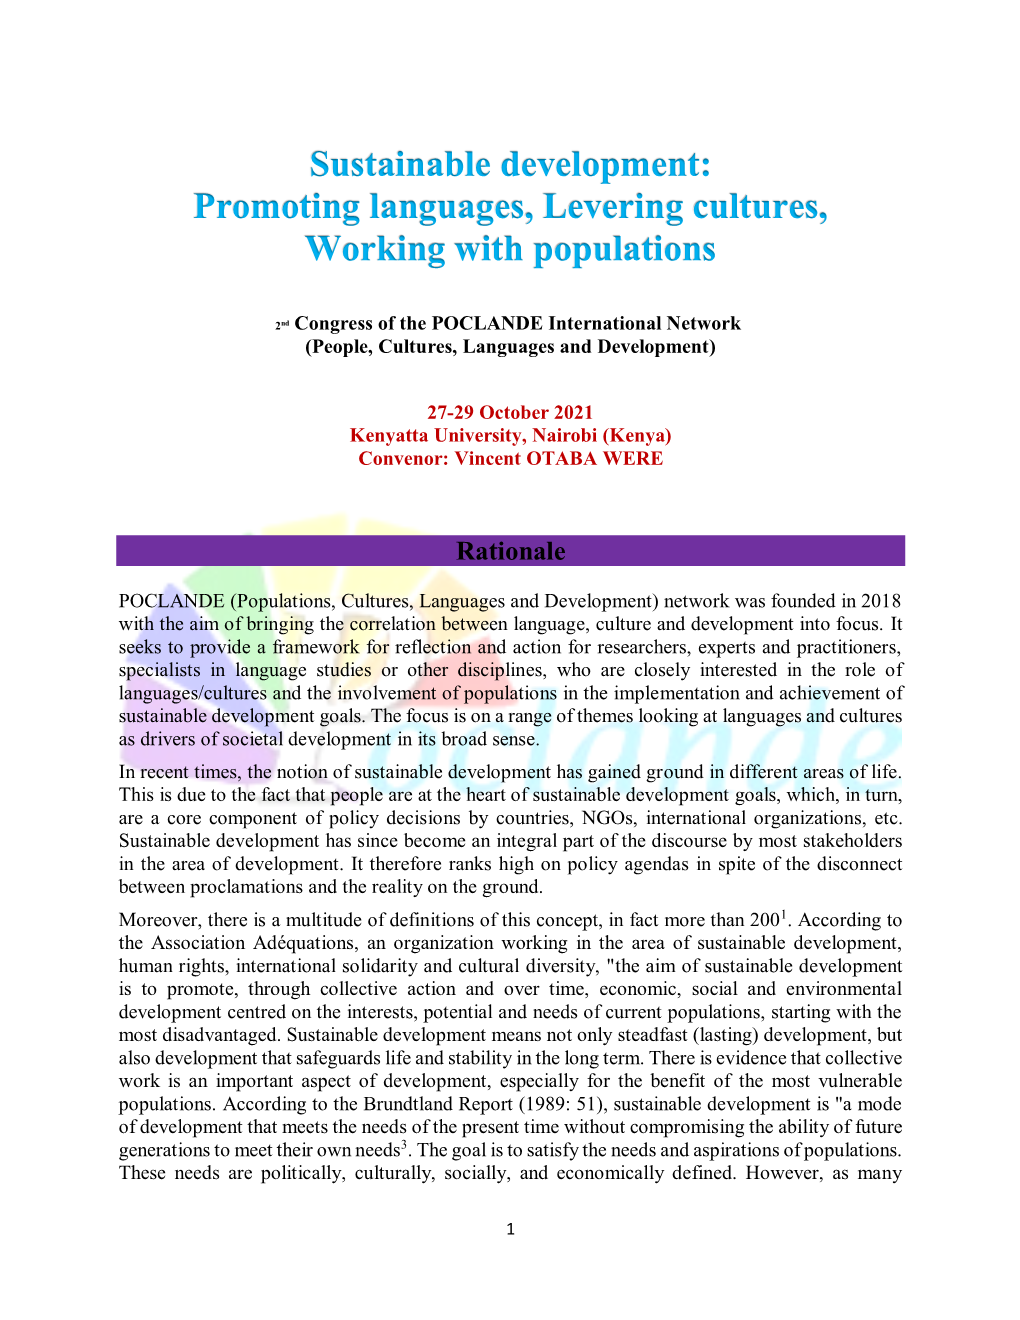 Sustainable Development: Promoting Languages, Levering Cultures, Working with Populations